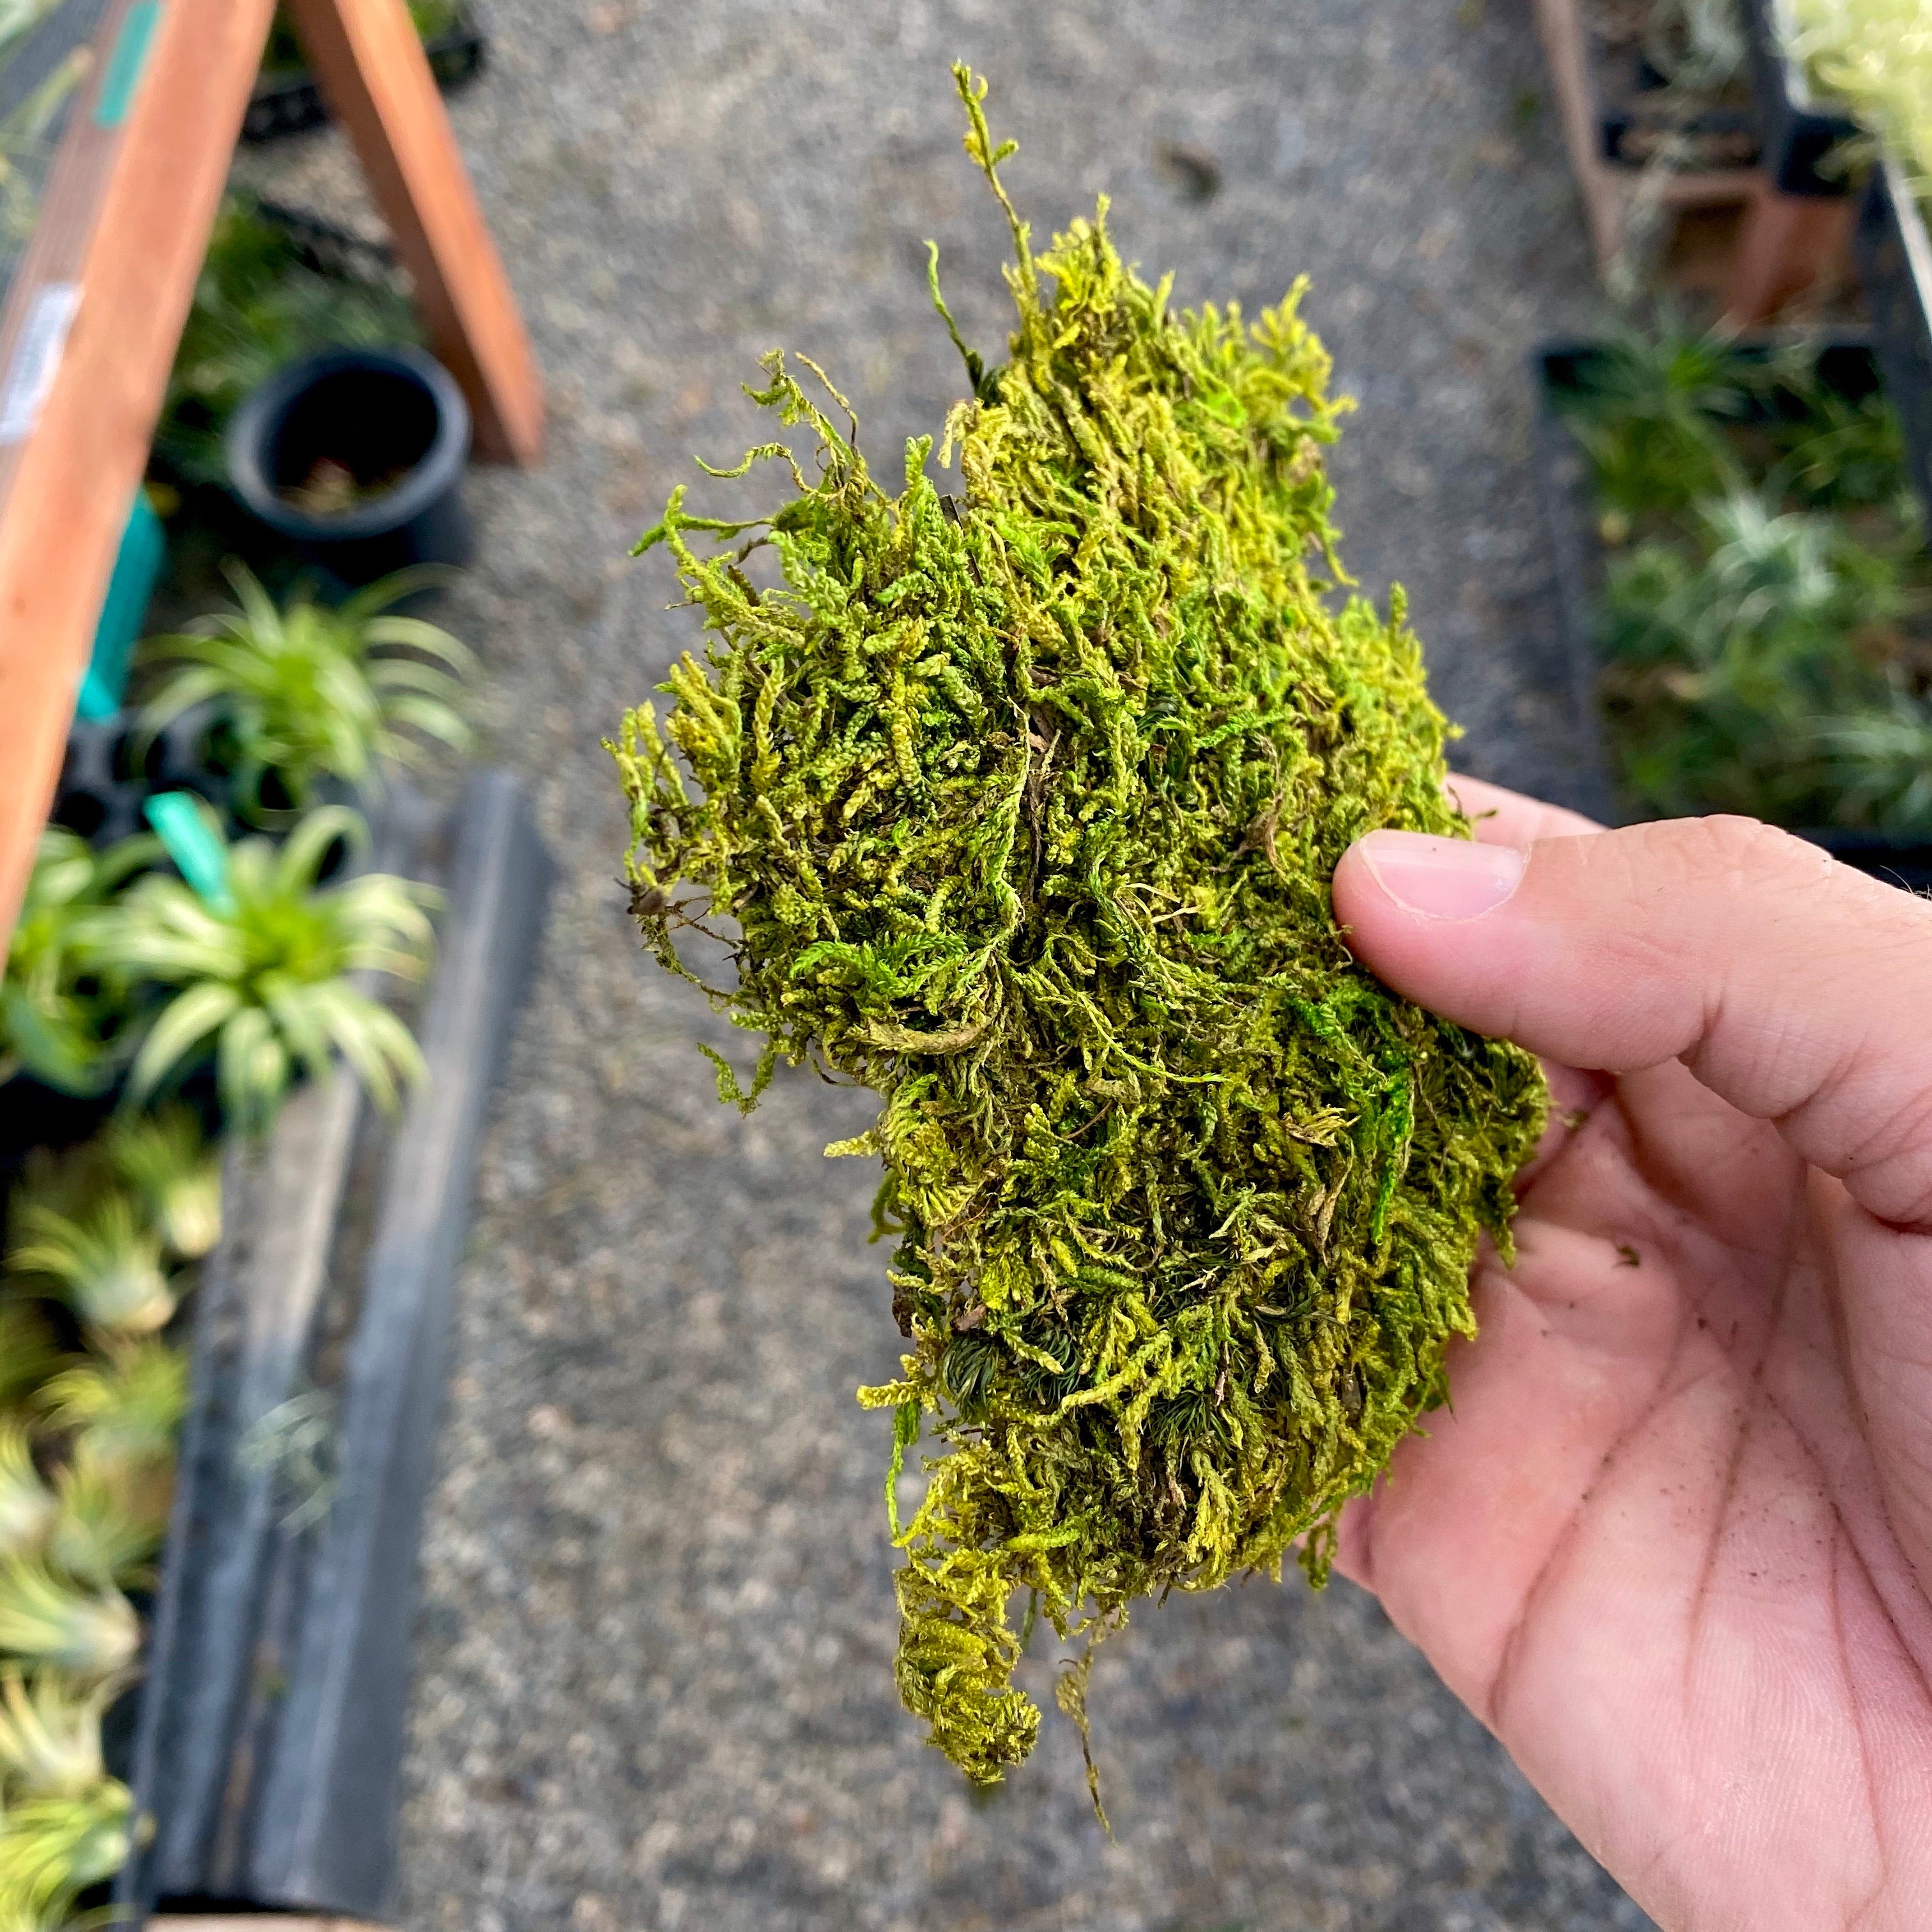 Natural Preserved Sheet Moss – Moss Acres